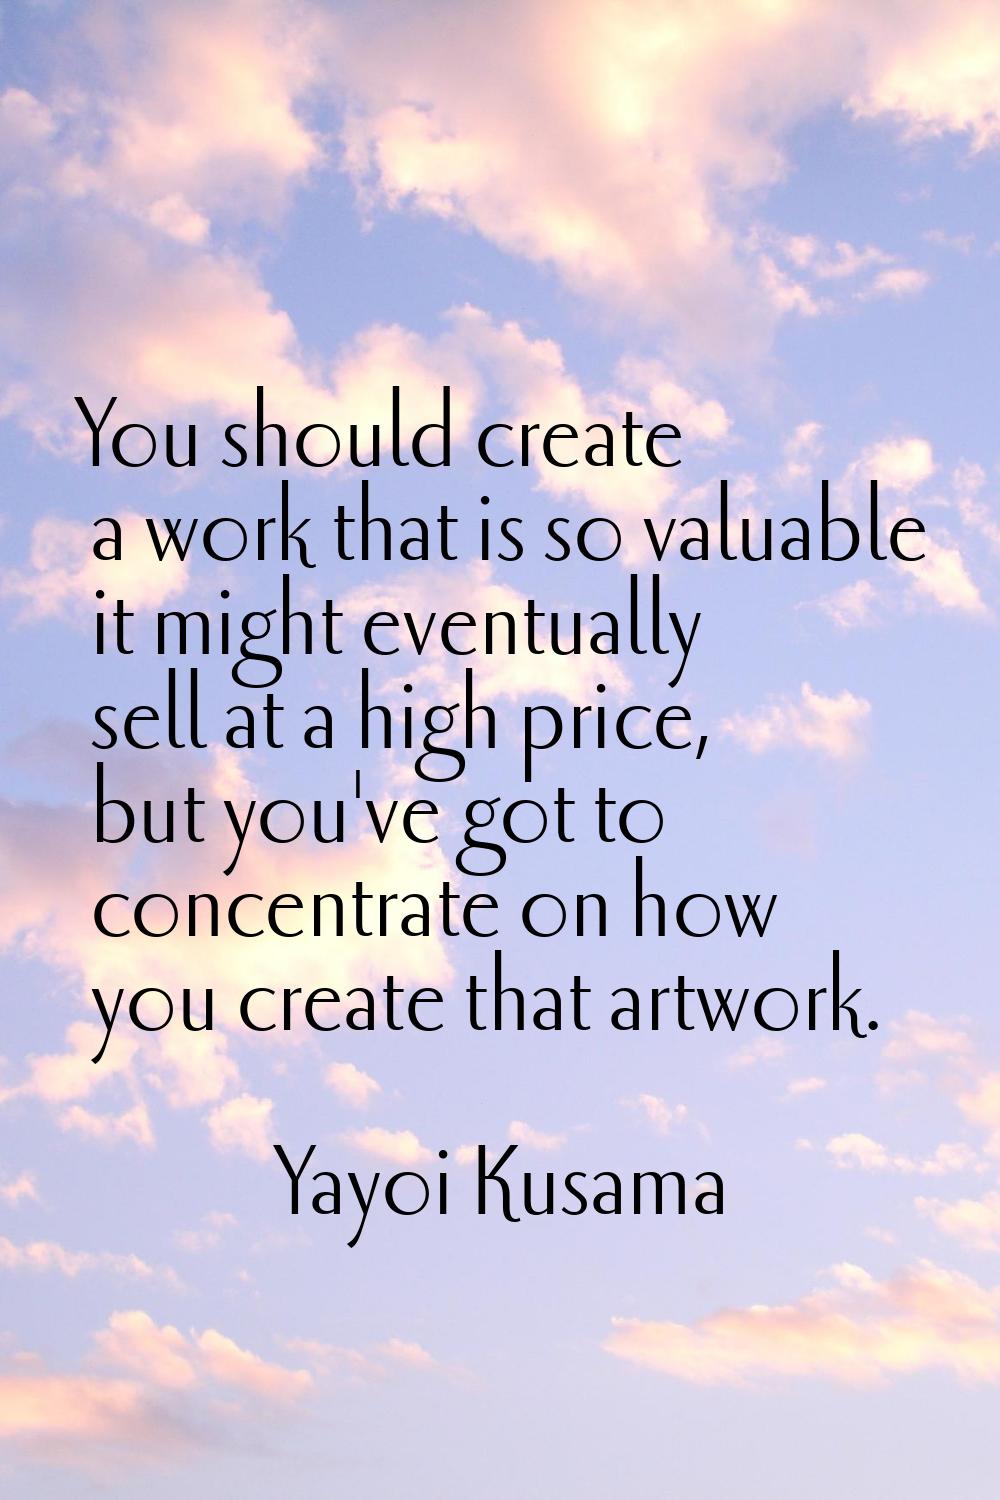 You should create a work that is so valuable it might eventually sell at a high price, but you've g